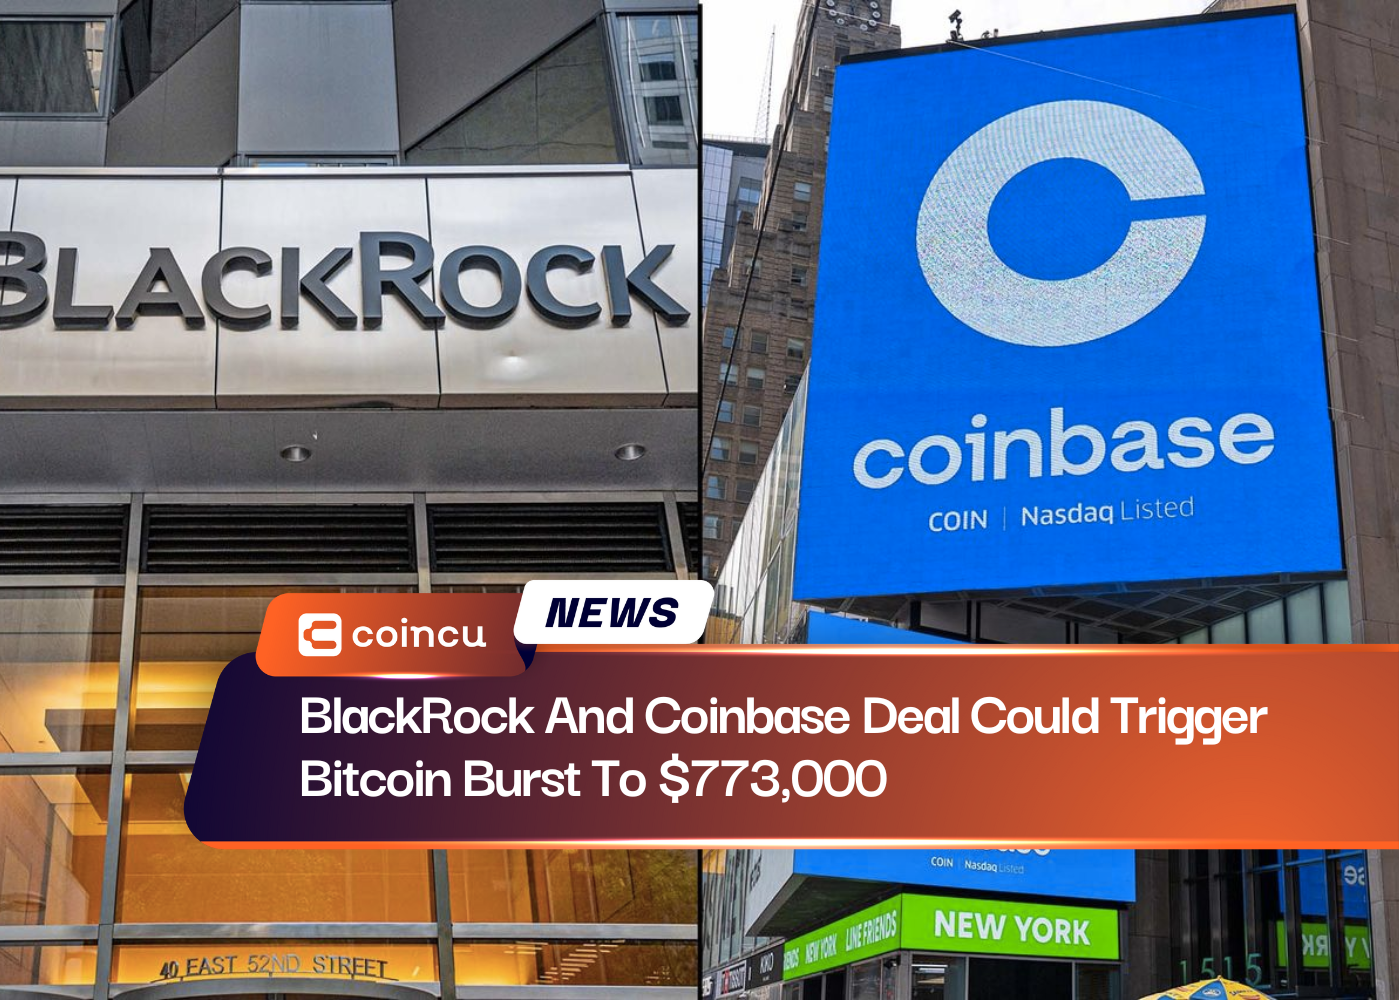 BlackRock And Coinbase Deal Could Trigger Bitcoin Burst To $773,000